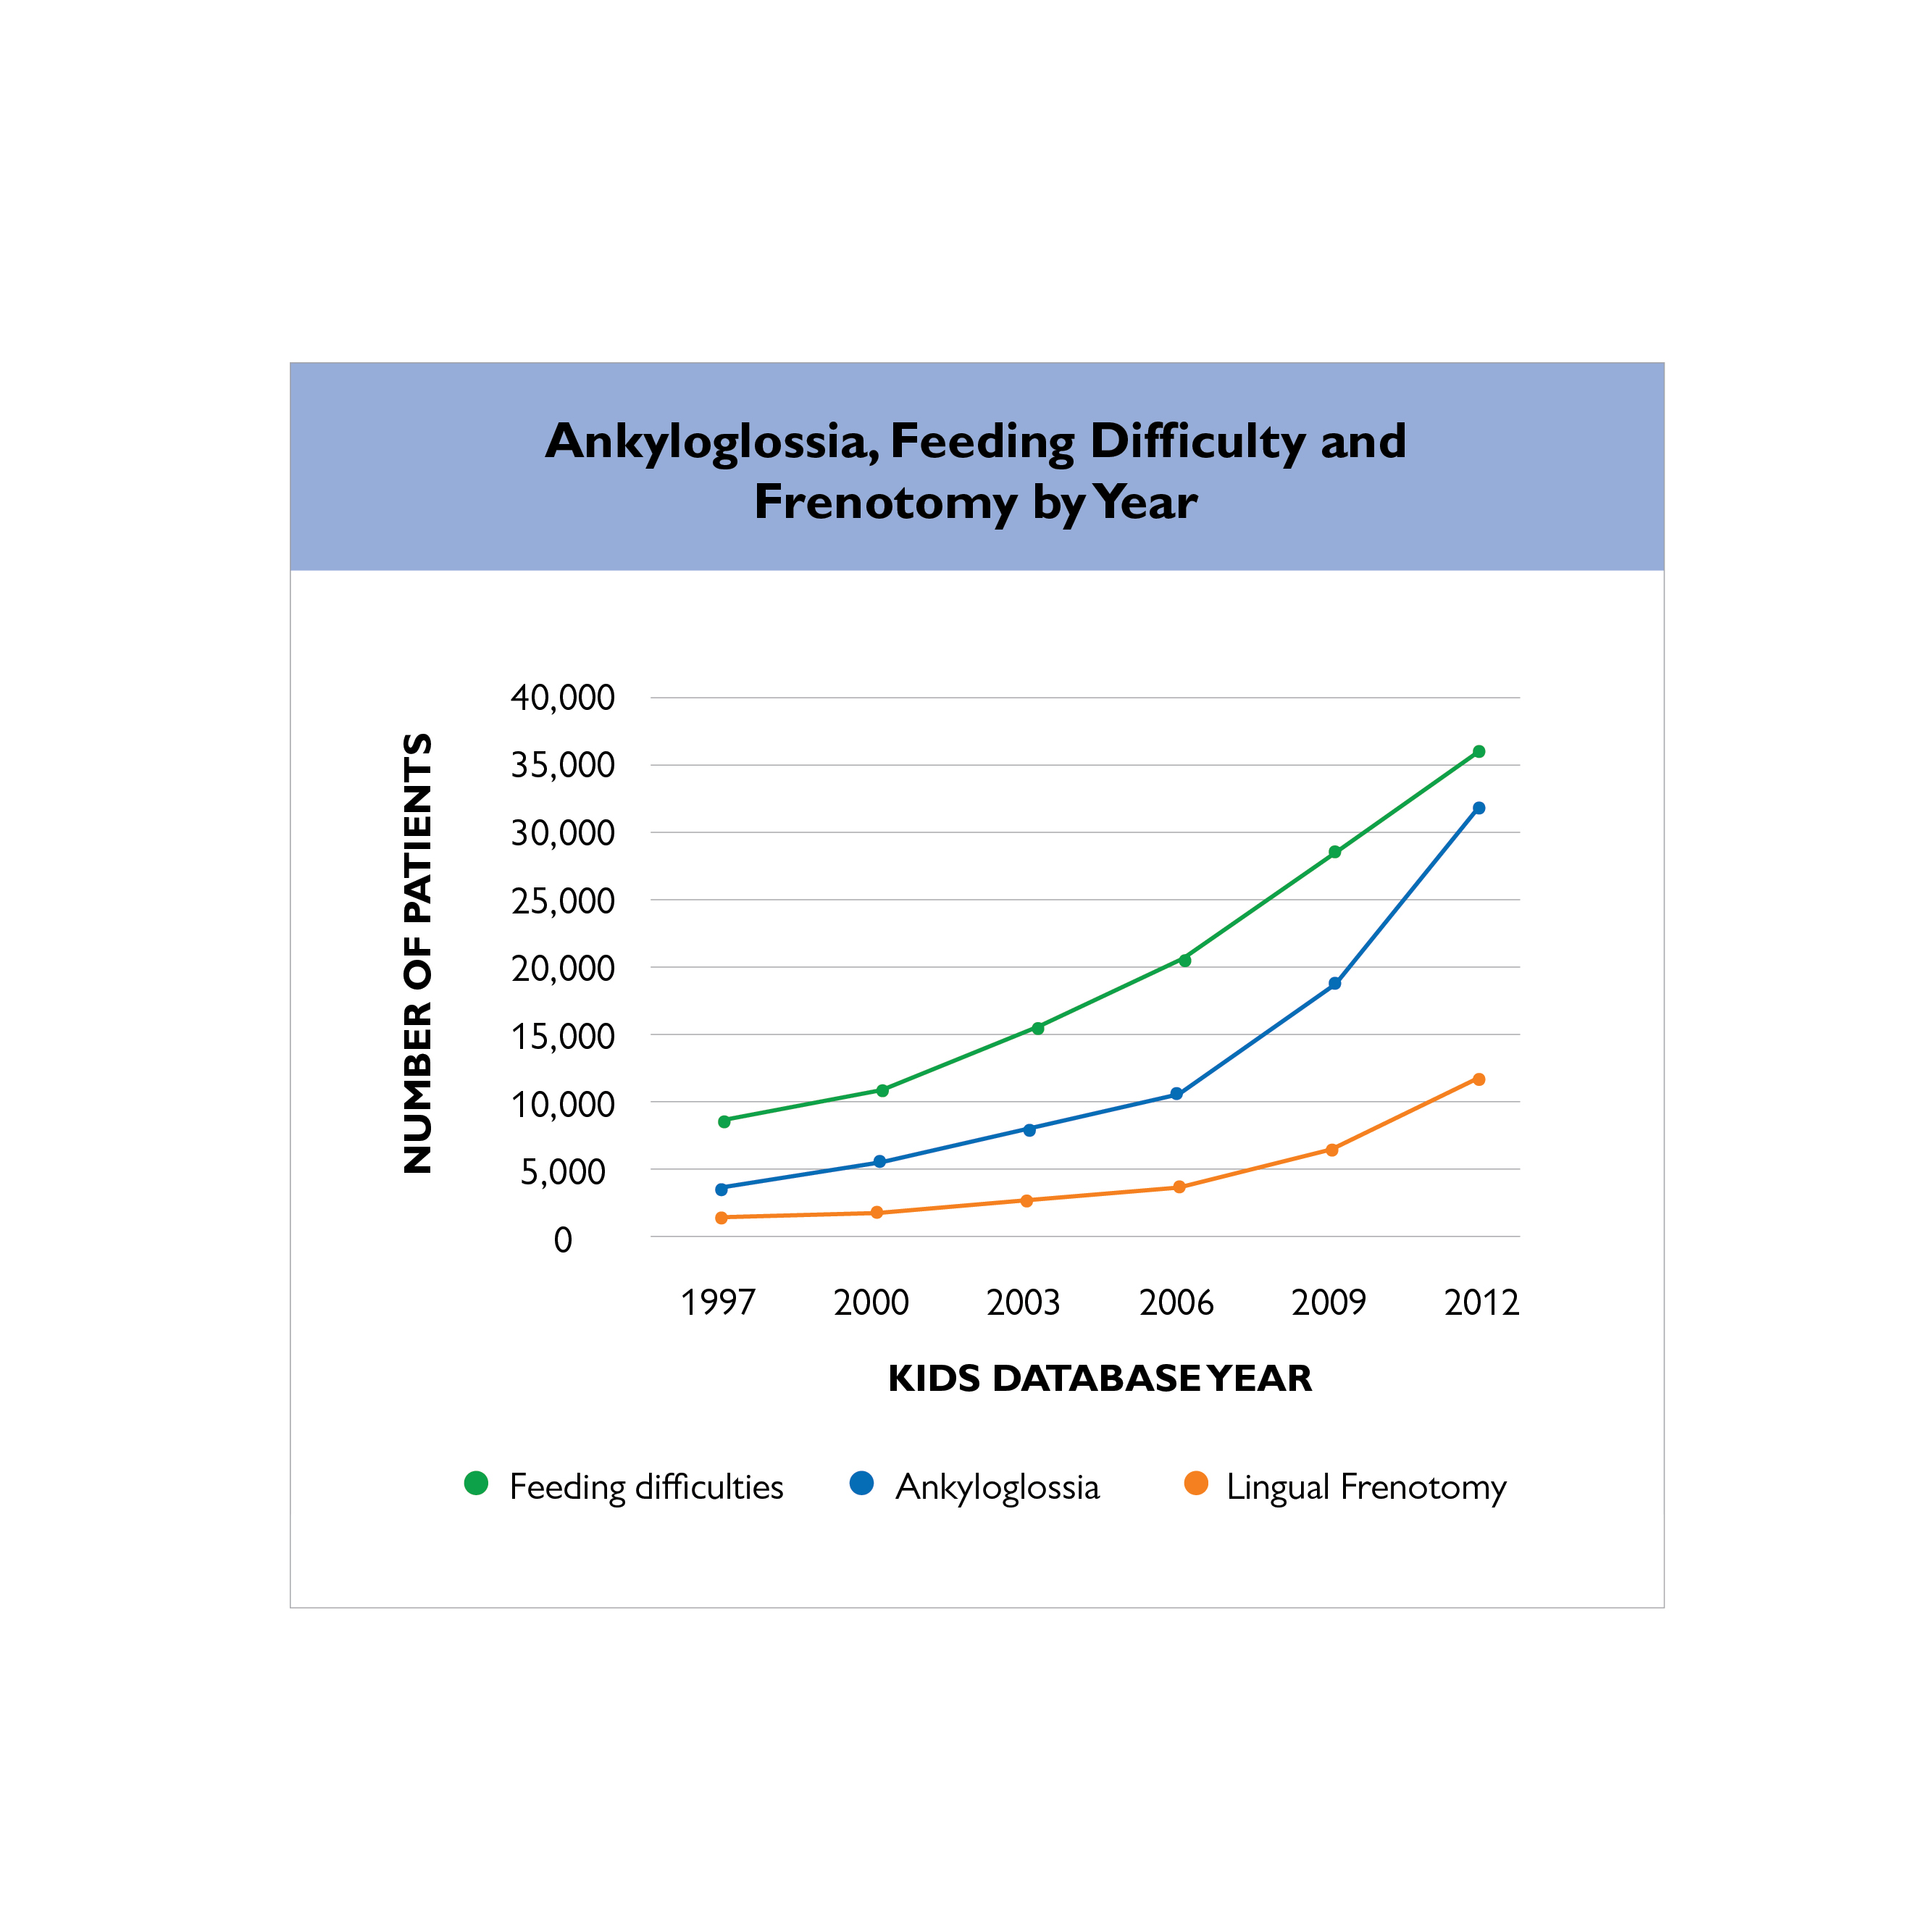 Chart depicting Ankyloglossia, Feeding Difficulty and Frenotomy by Year